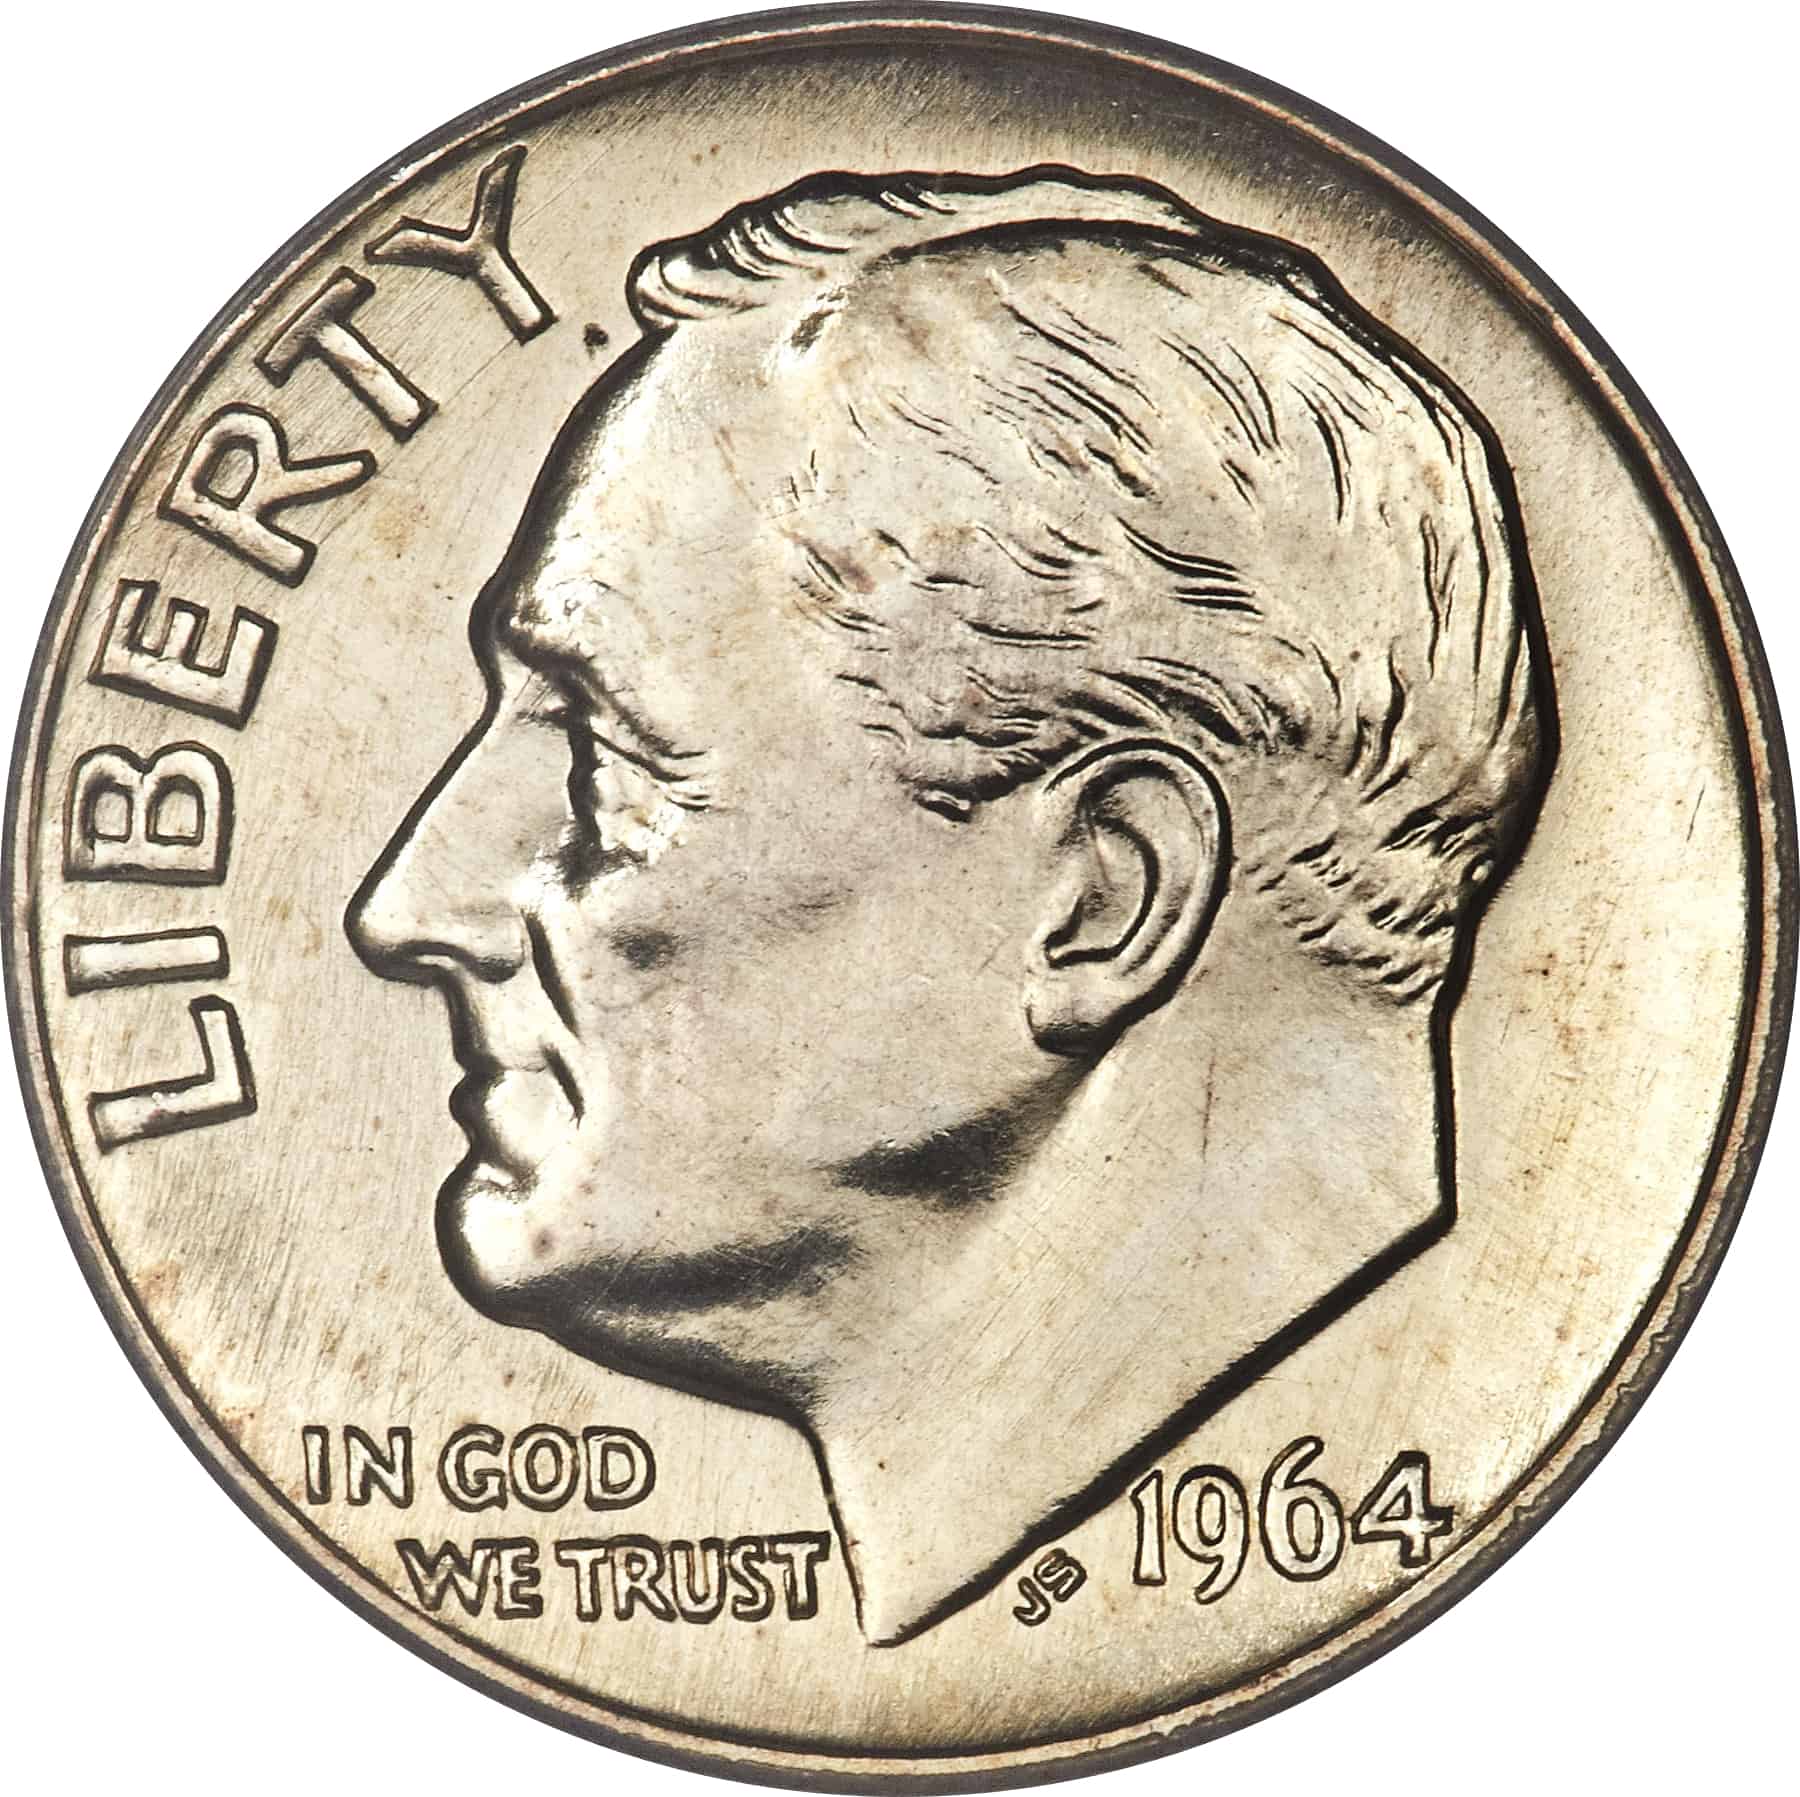 The Obverse of the 1964 Dime